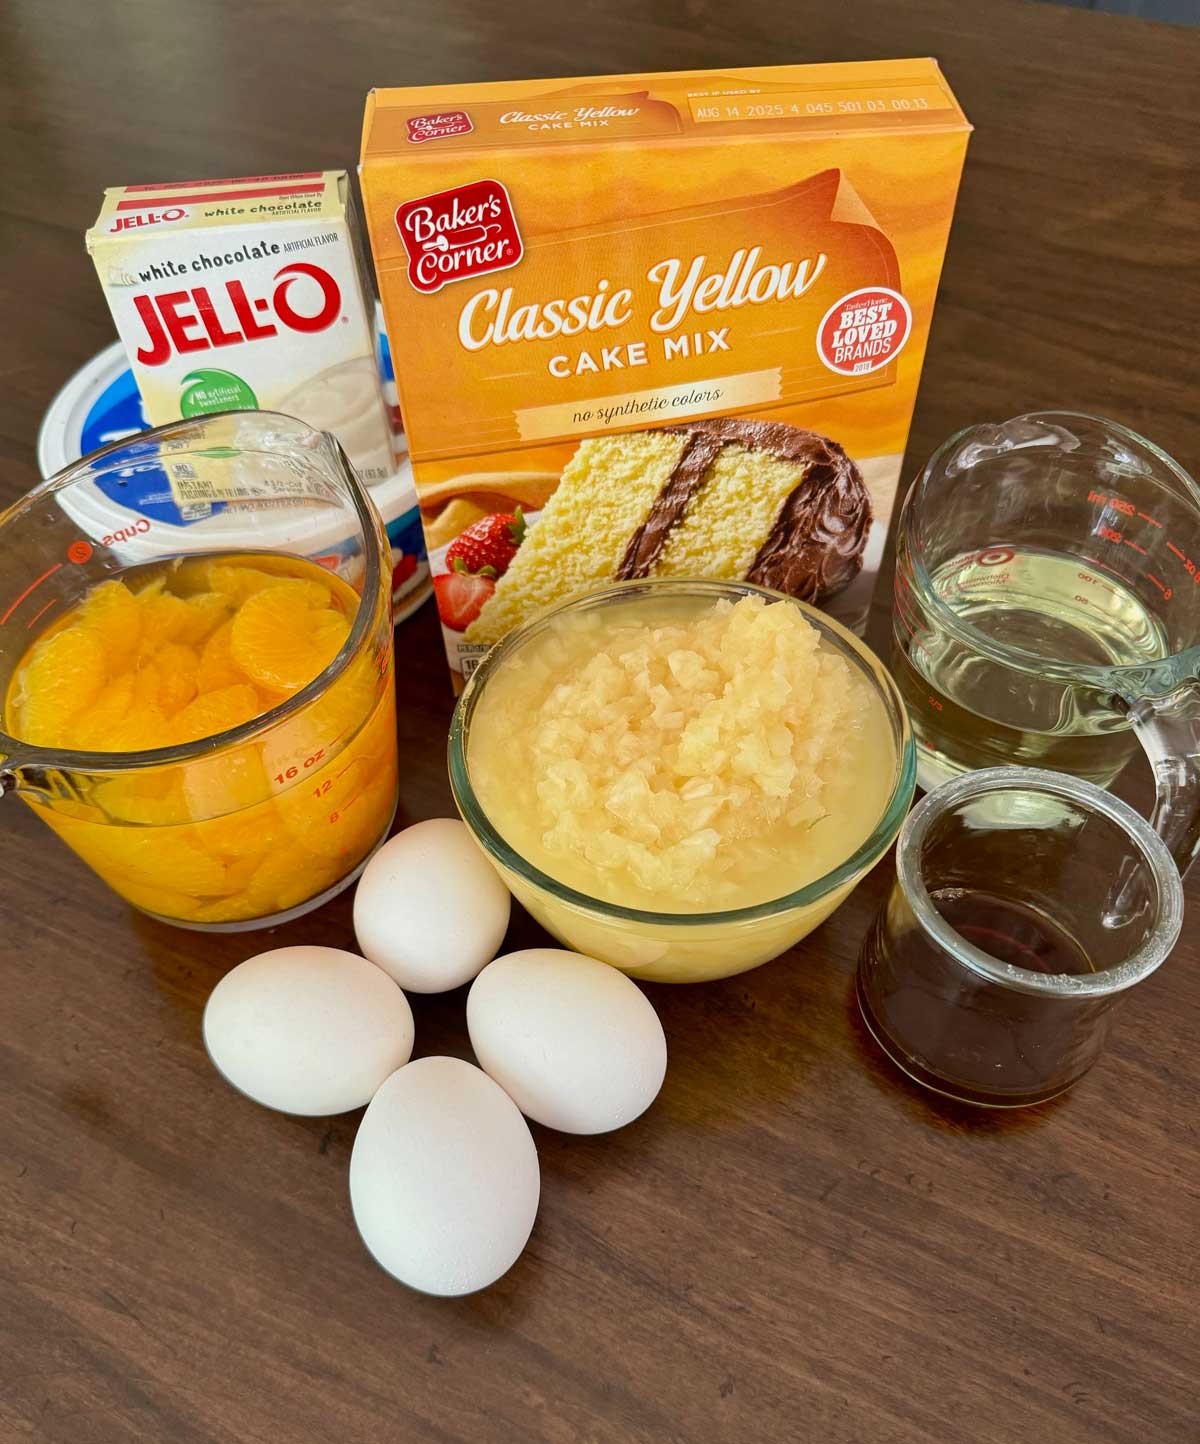 Ingredients for Pig Pickin' Cake including pudding mix, yellow cake mix, mandarin oranges, eggs, oil, pineapple, vanilla and whipped topping.